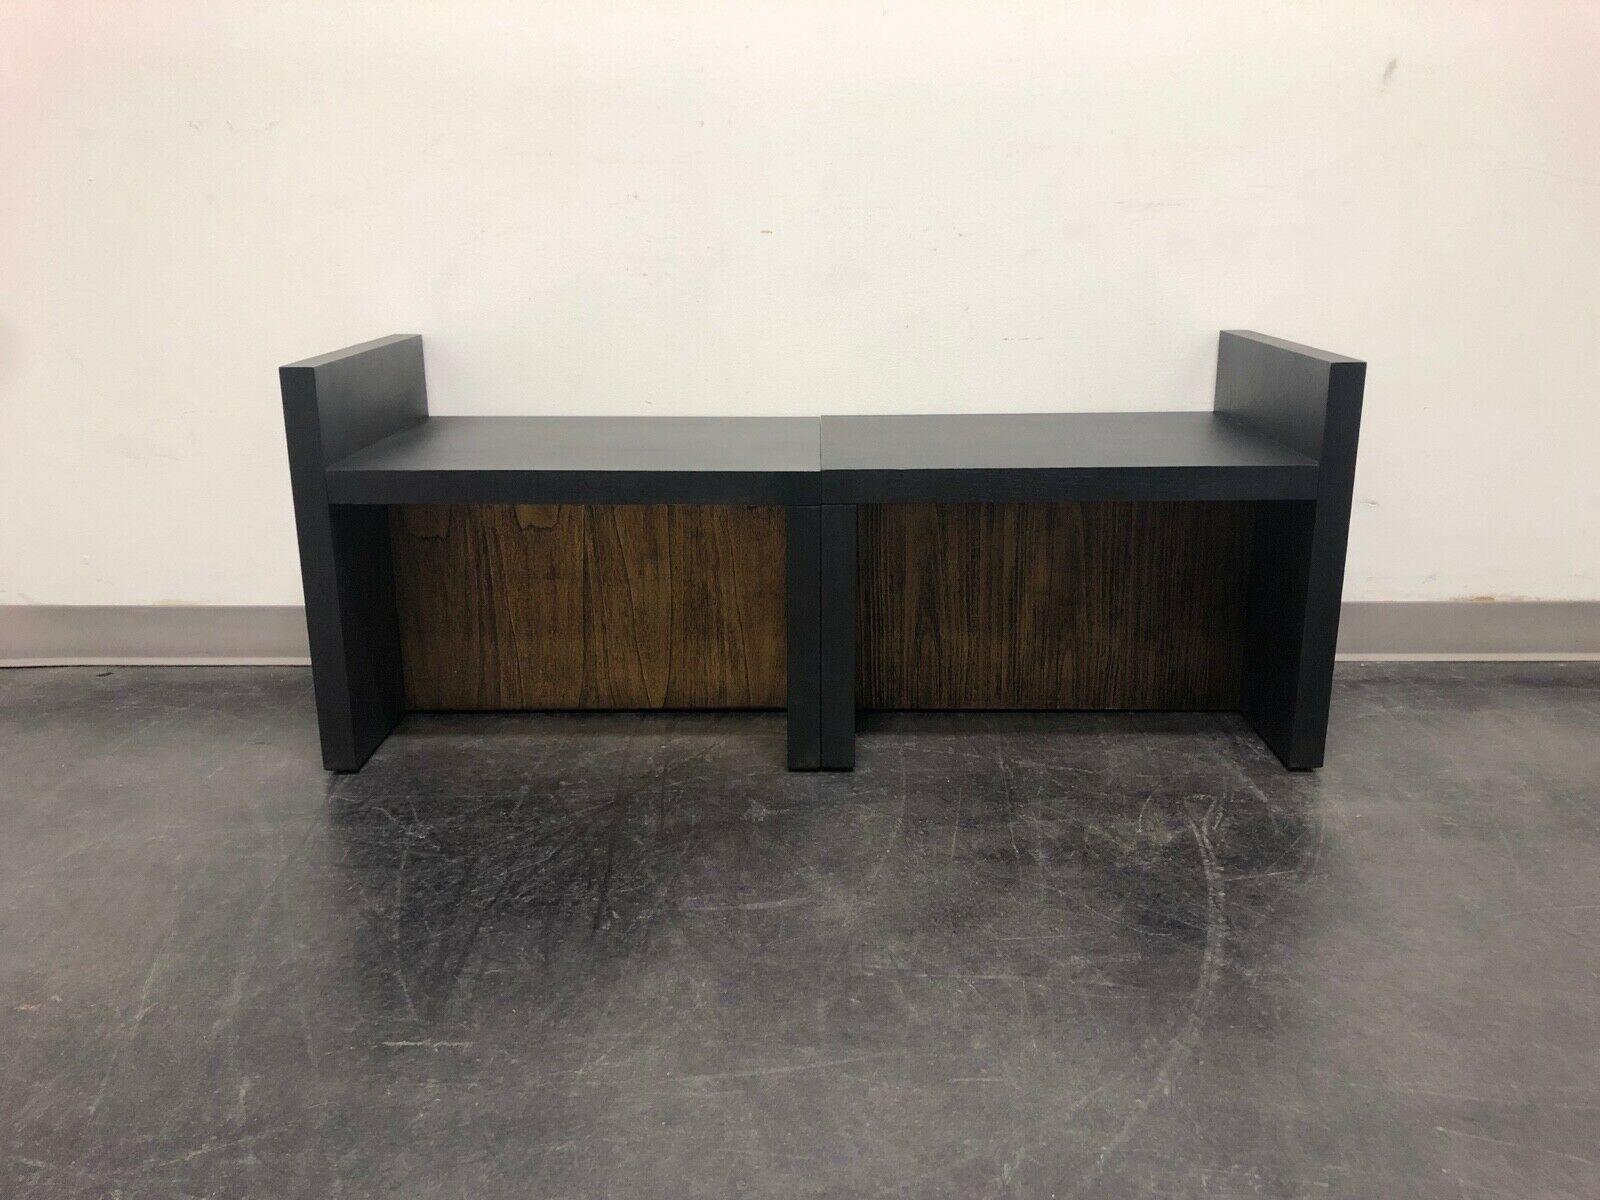 A pair of contemporary benches designed by Kara Mann for Baker Furniture Company for their Milling Road line. Black and Walnut. Simple cushions can be made to complement your existing decor. $1,795 is the price for the pair.

Baker Model #: MR